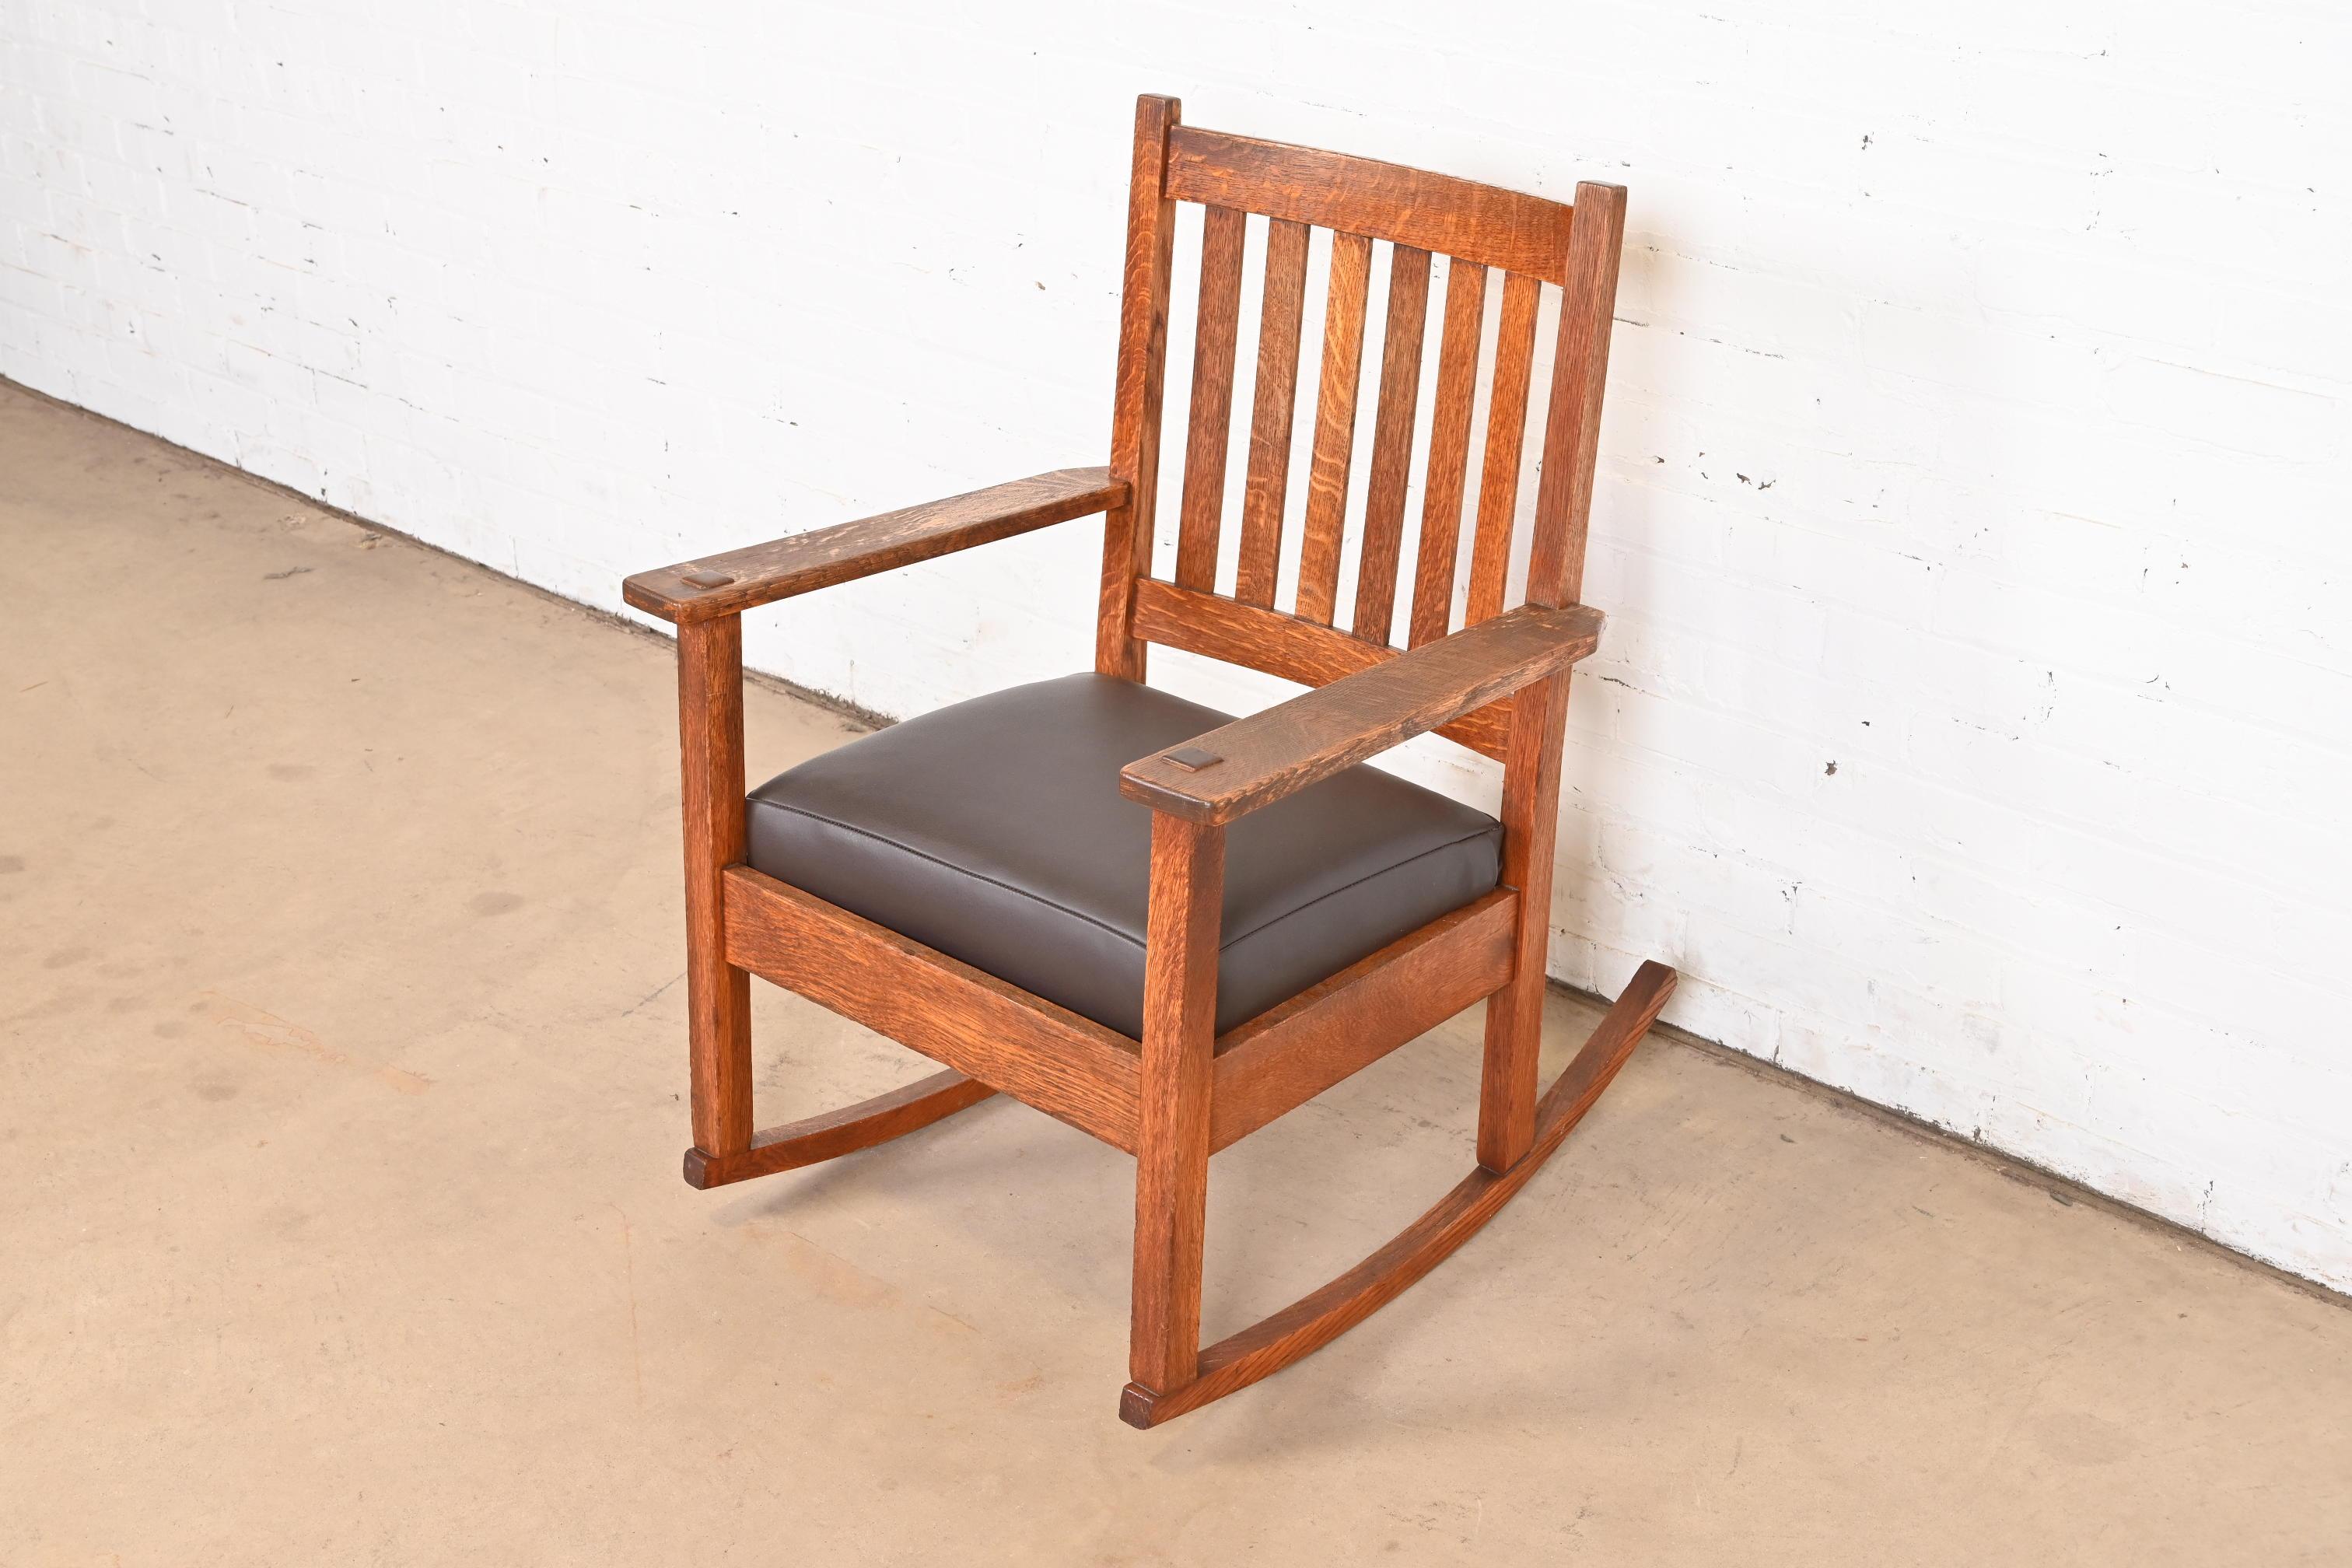 20th Century Stickley Brothers Antique Mission Oak Arts & Crafts Rocking Chair, Circa 1900 For Sale